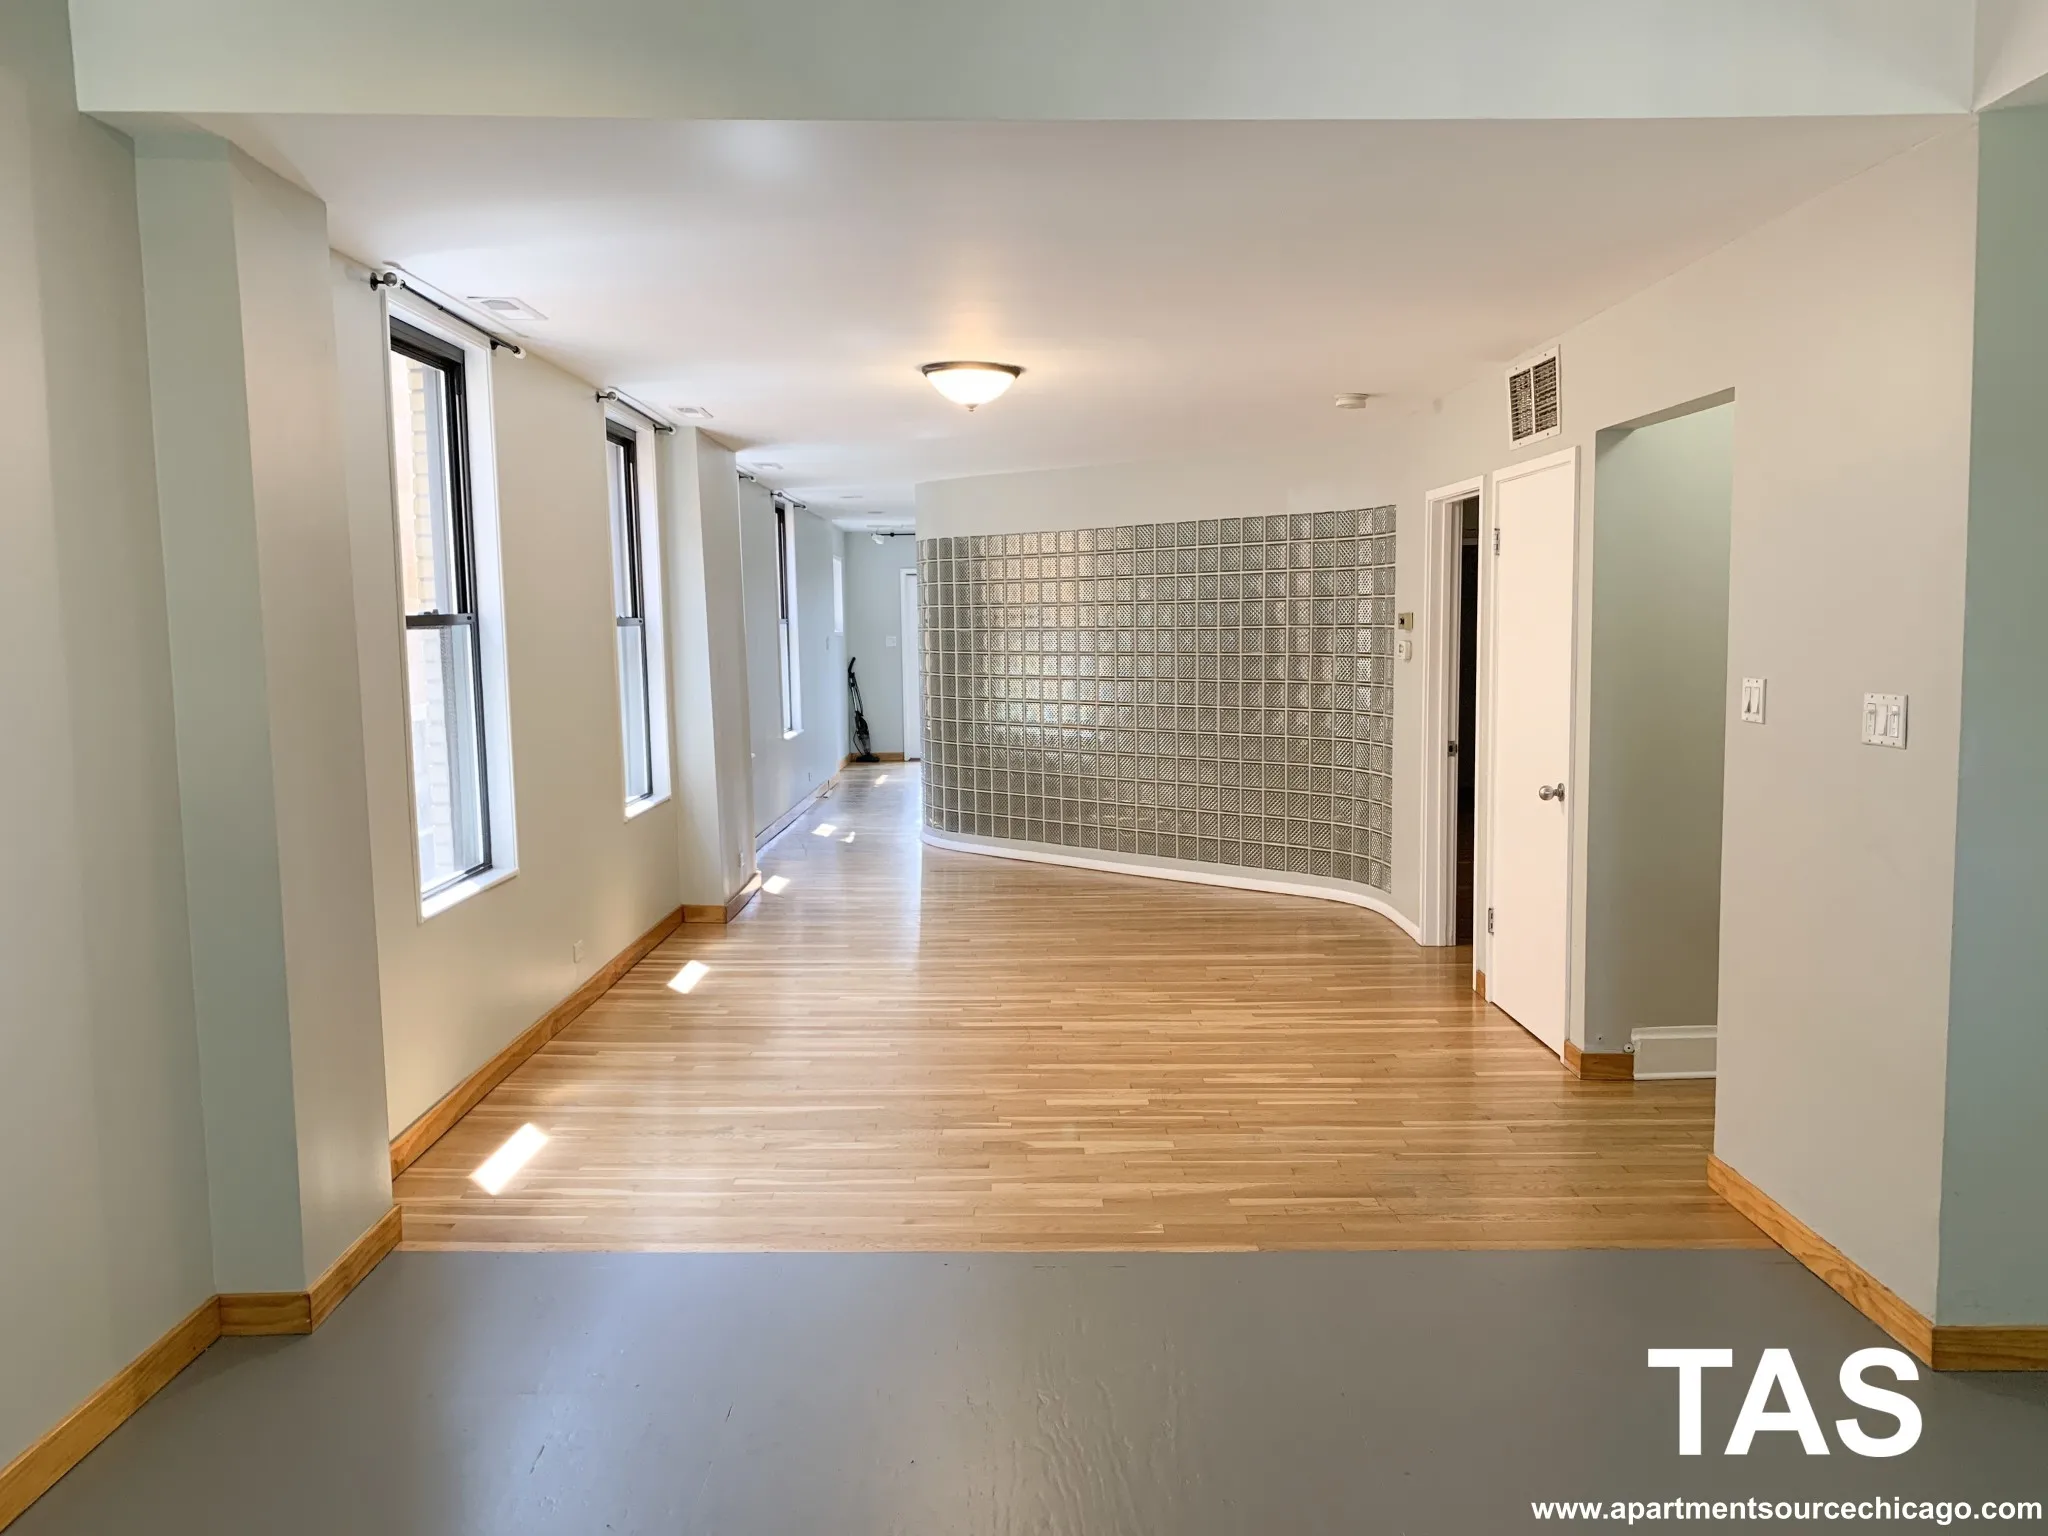 2308 N GREENVIEW AVE 60614-unit#2-Chicago-IL